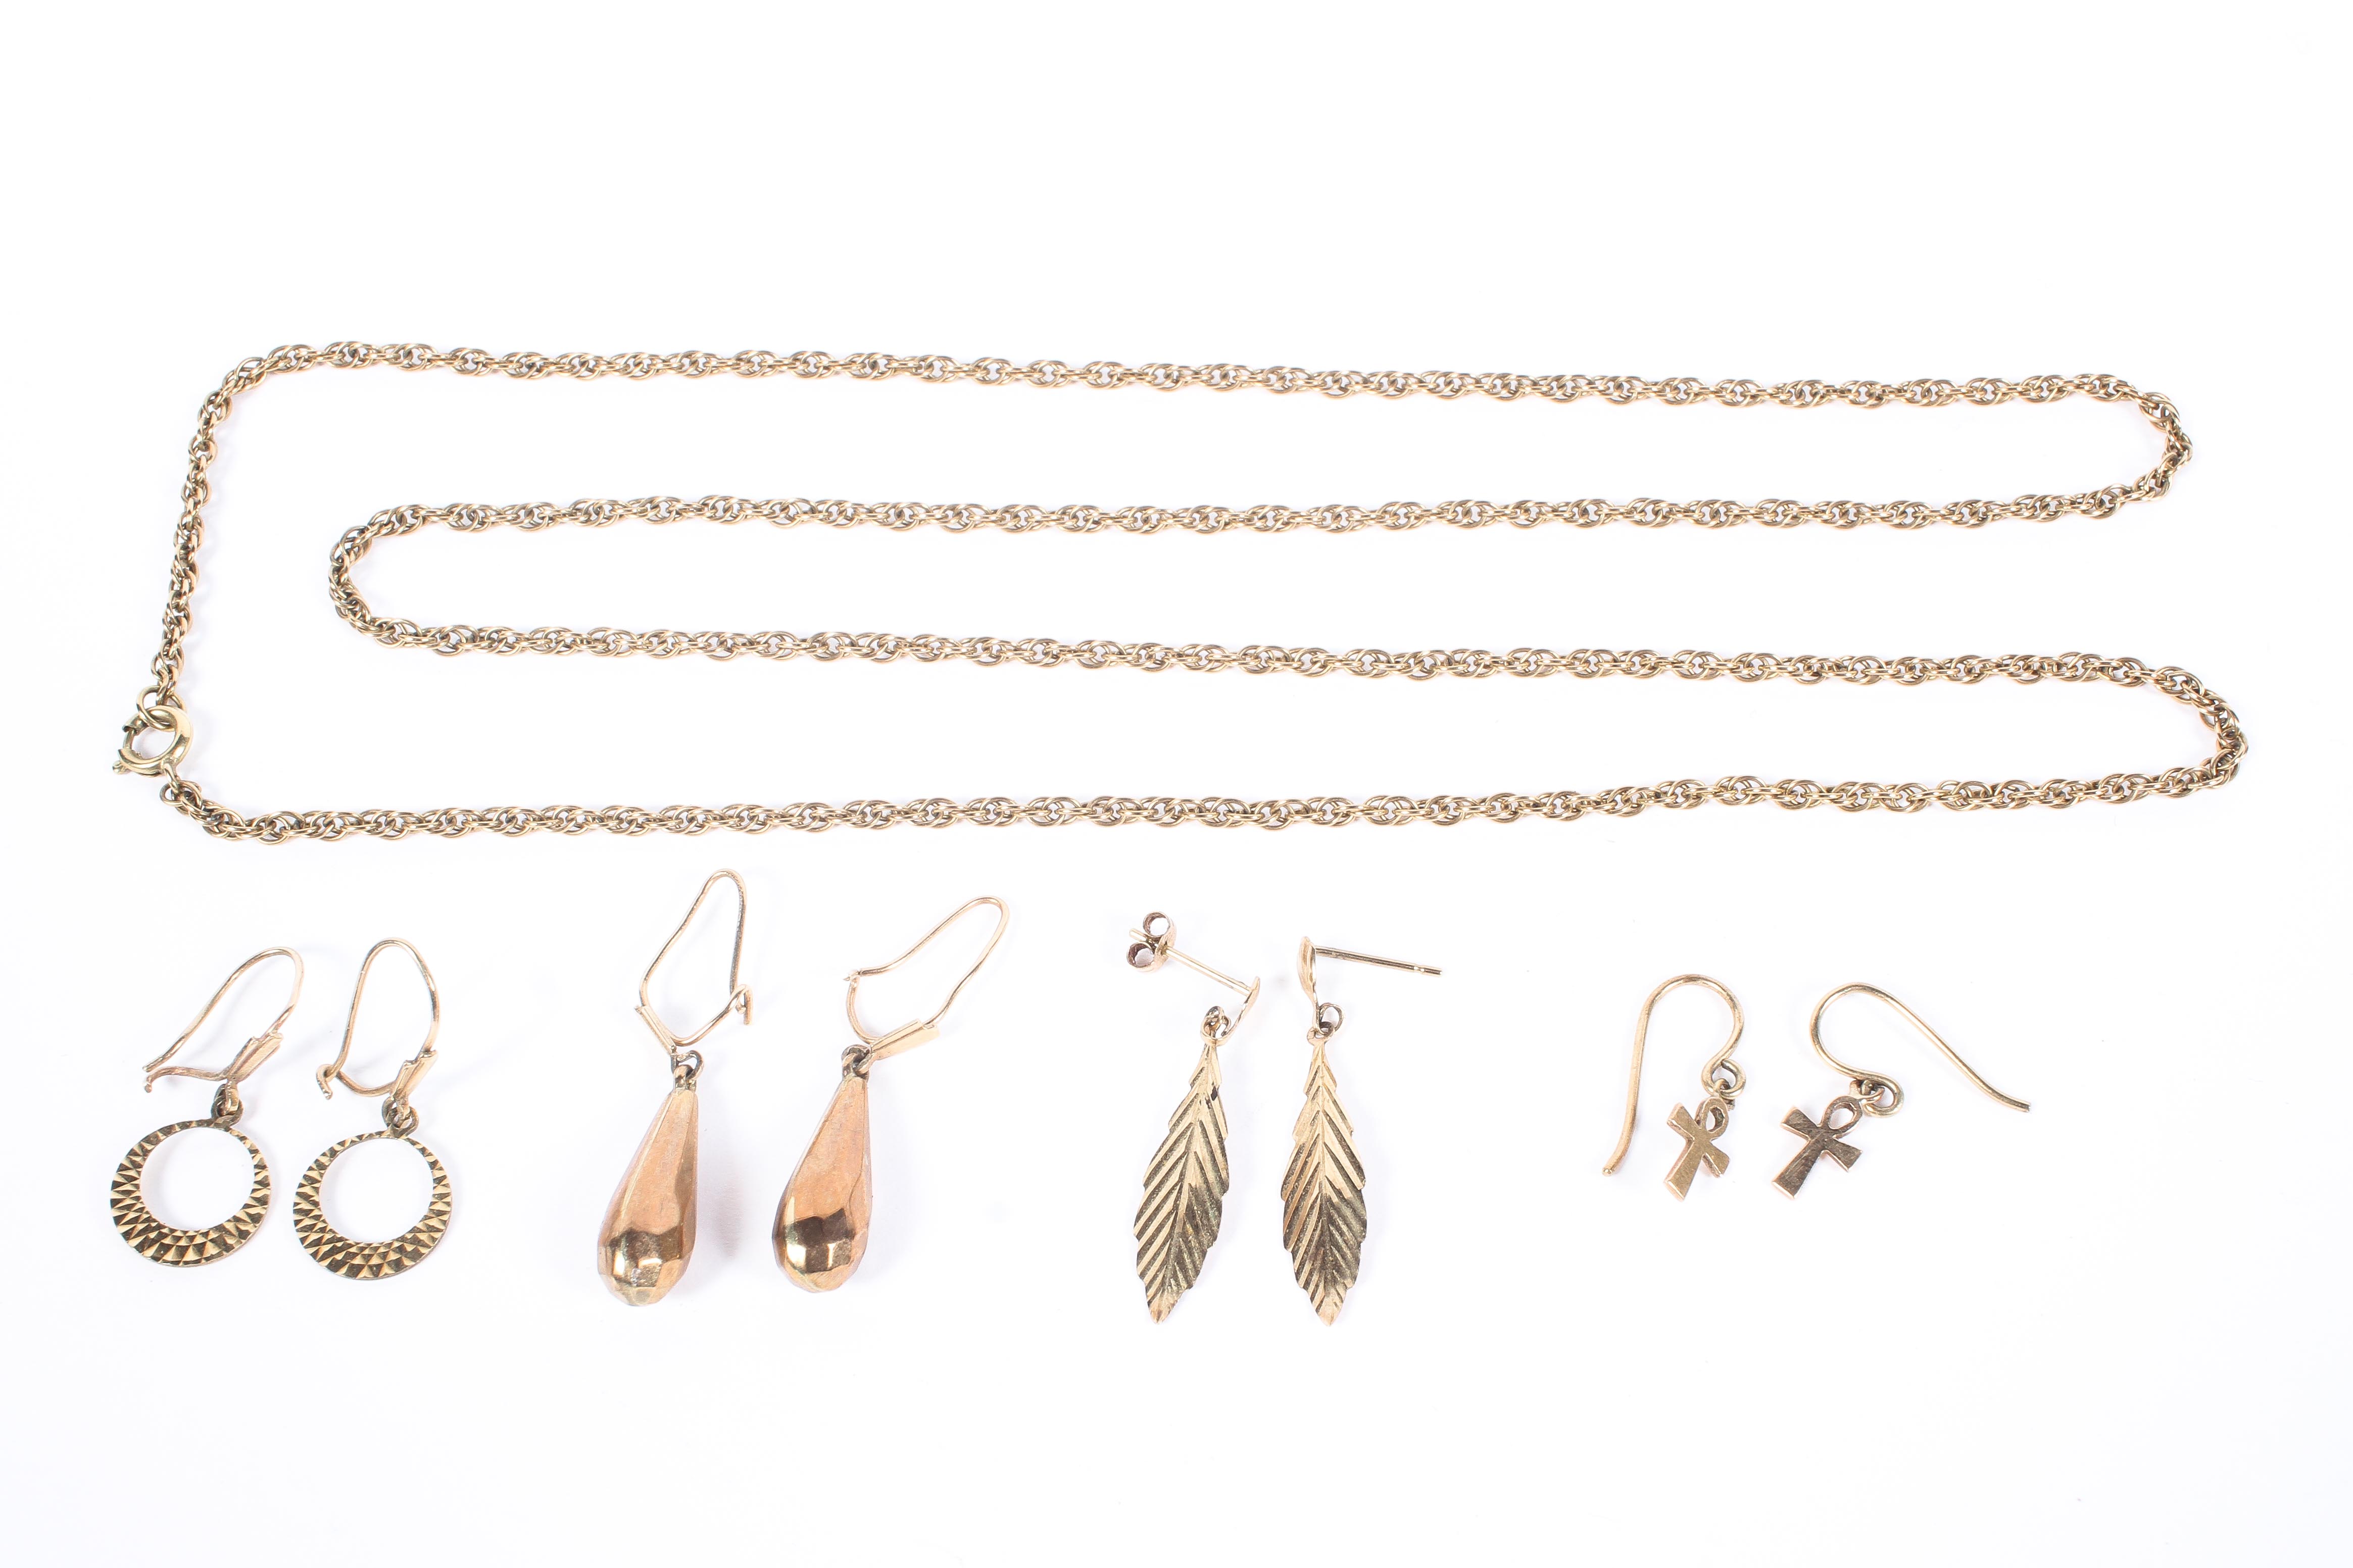 A collection of unmarked yellow metal jewellery items to include earrings and a chain link necklace.